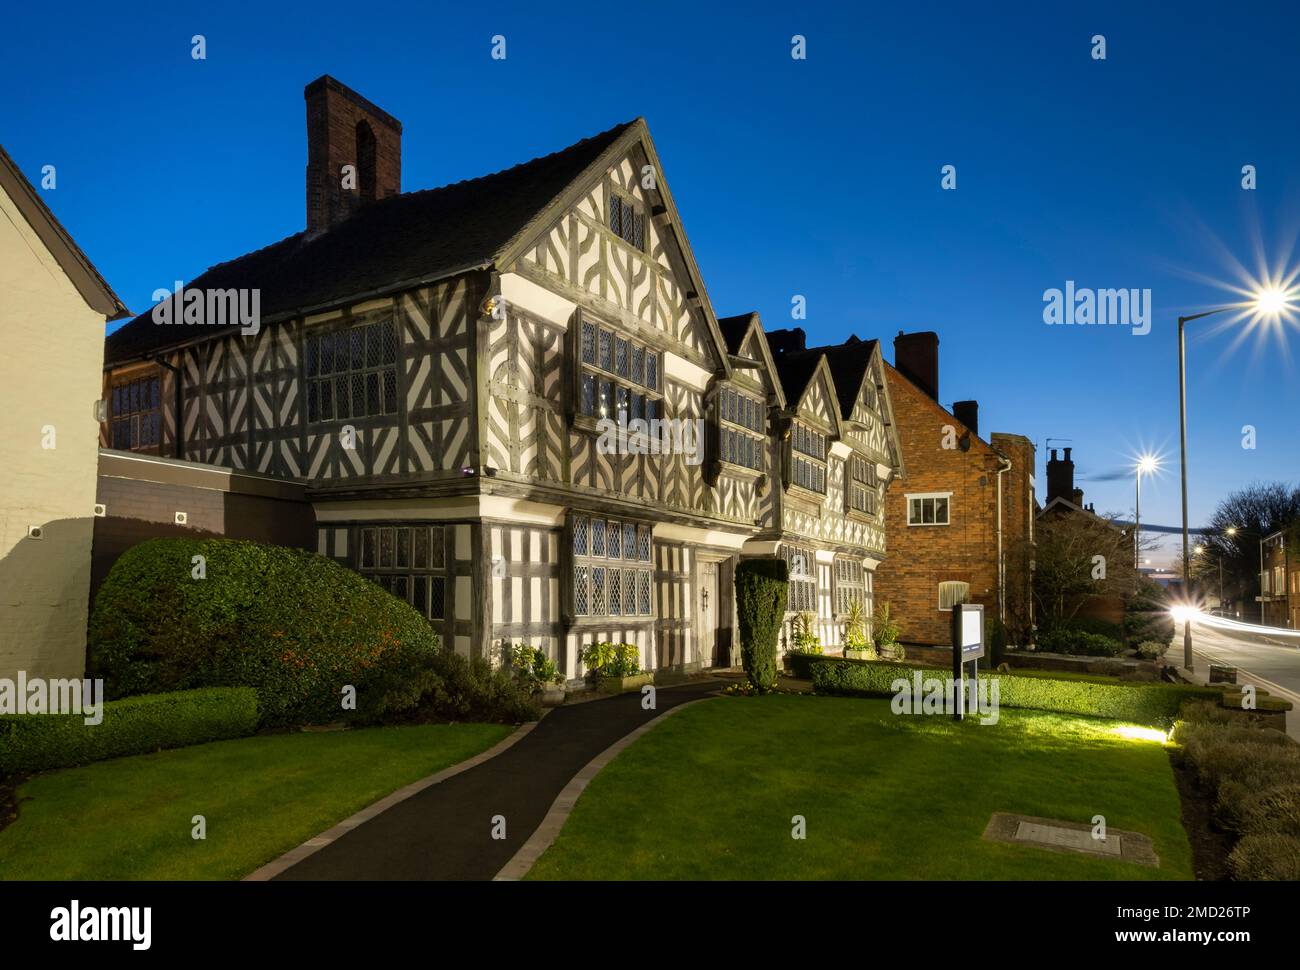 Churches Mansion at night, Hospital Street, Nantwich, Cheshire, England, UK Stock Photo